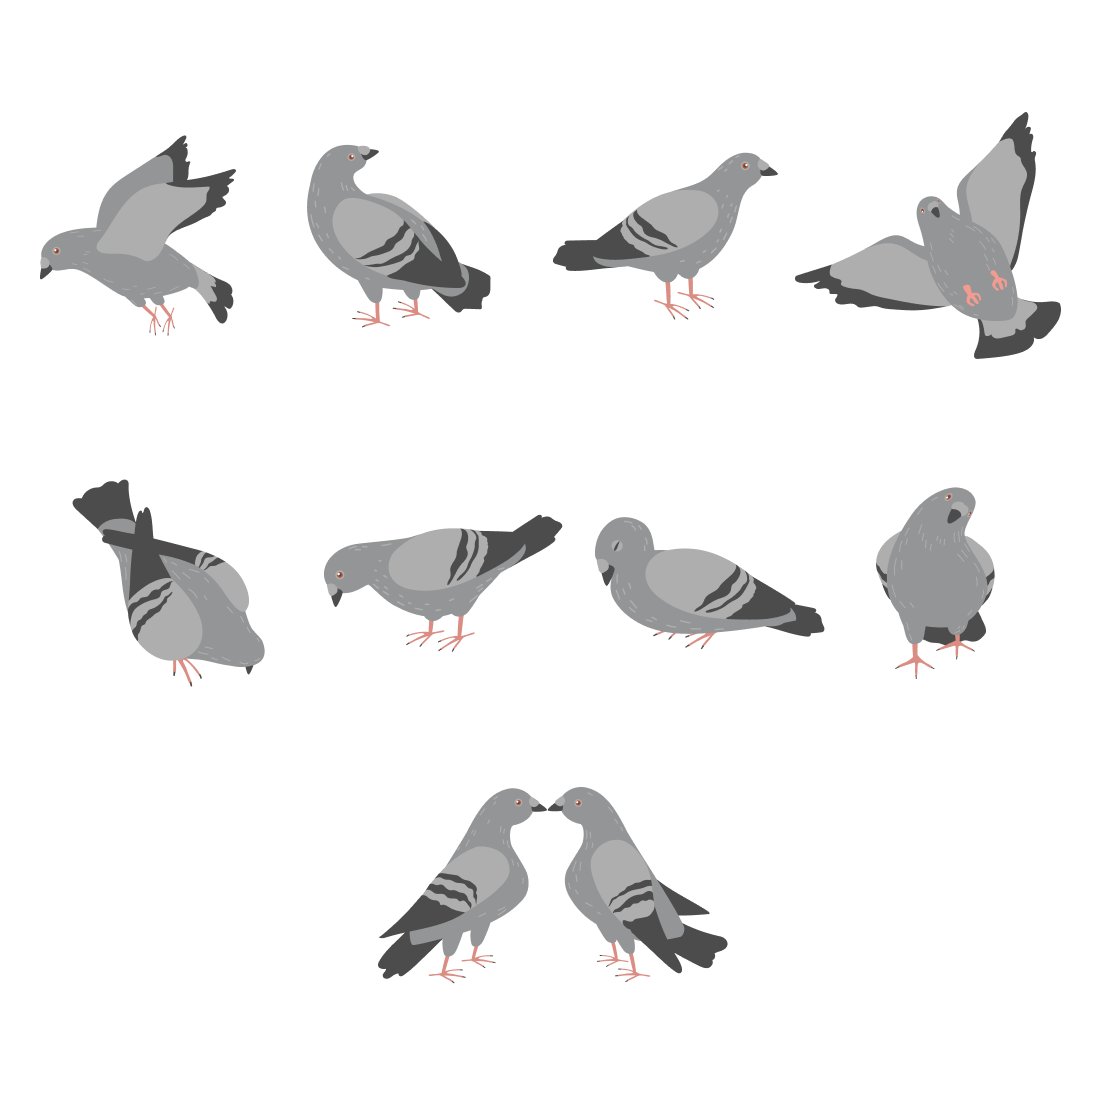 Group of pigeons standing next to each other.